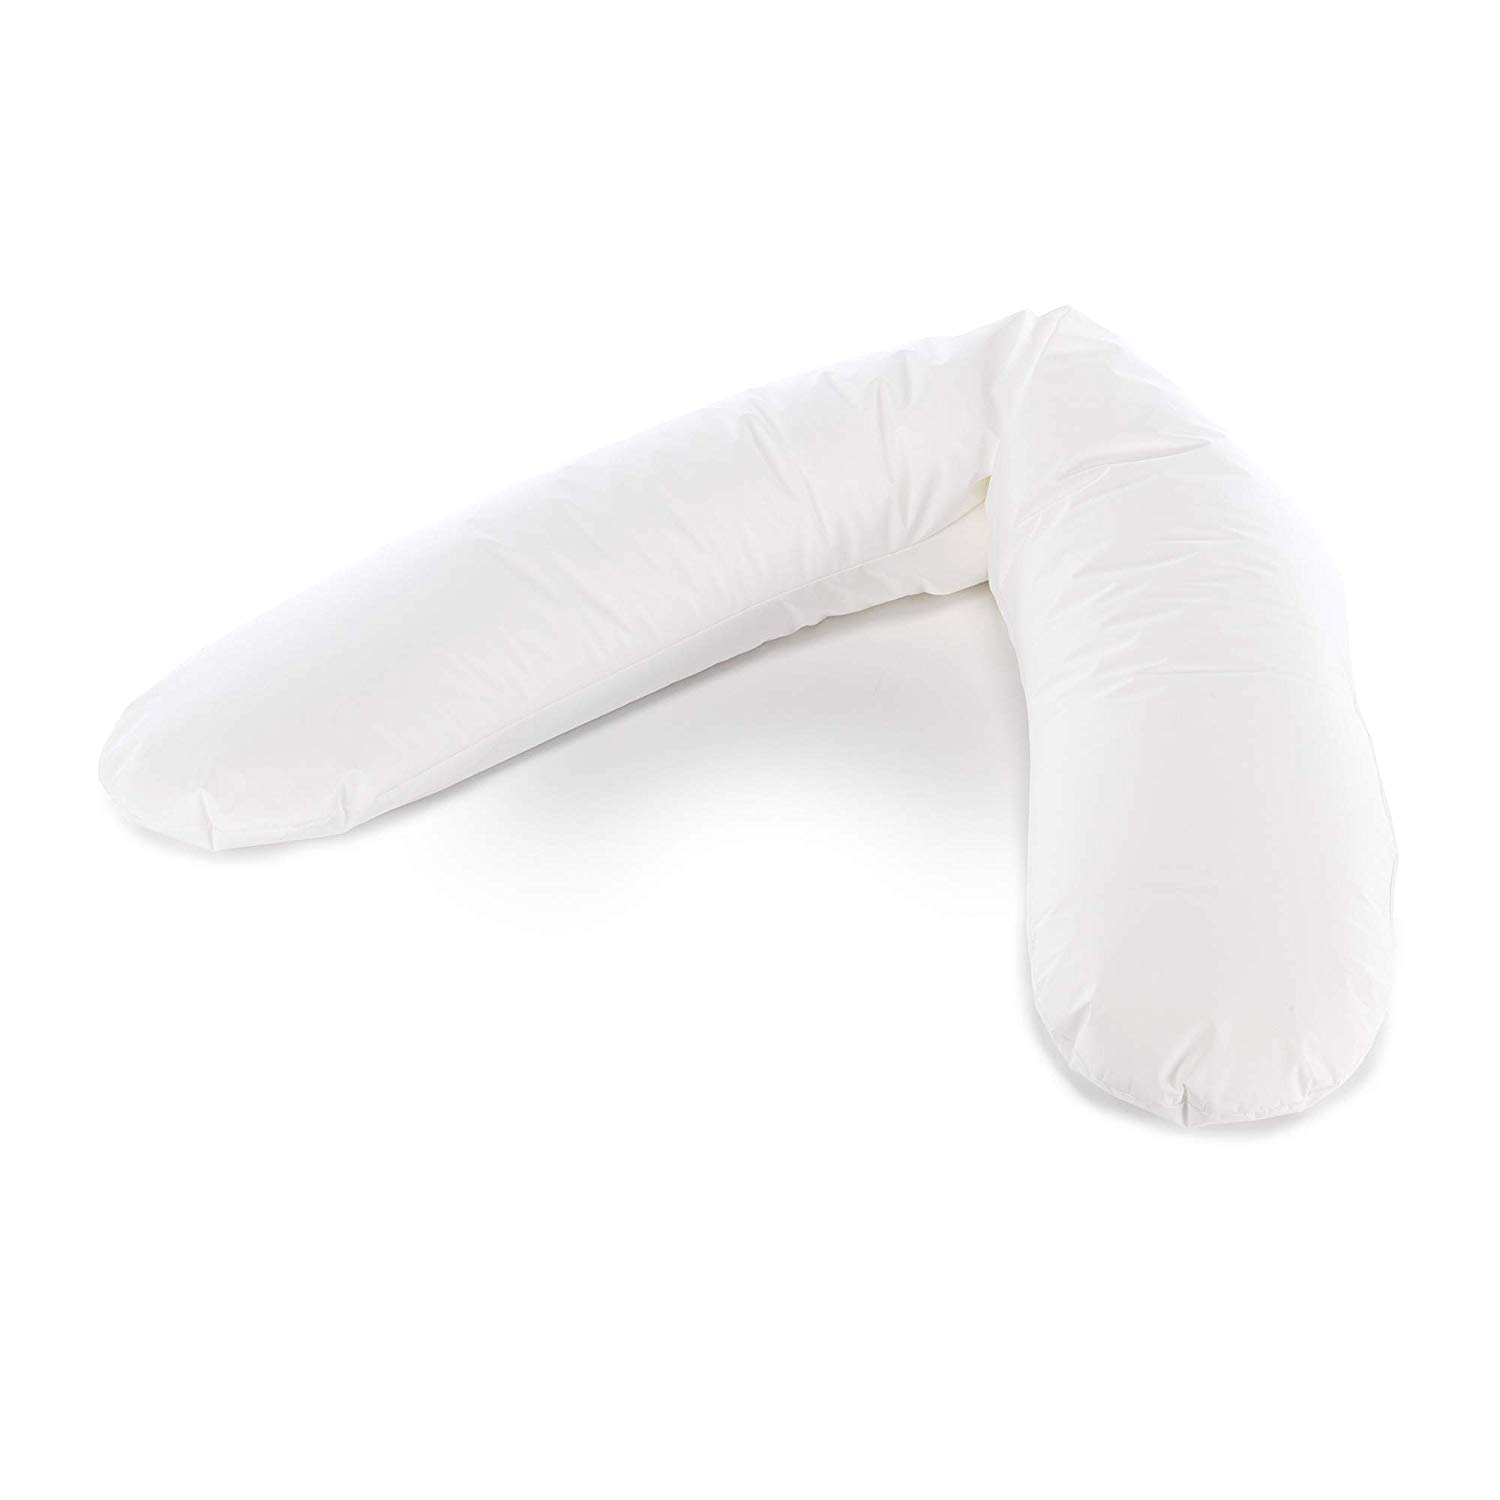 The Original Theraline Pregnancy and Breastfeeding Pillow Filled with Sand-Like Original Micro-Beads - Comes with Outer Cover,190 cm